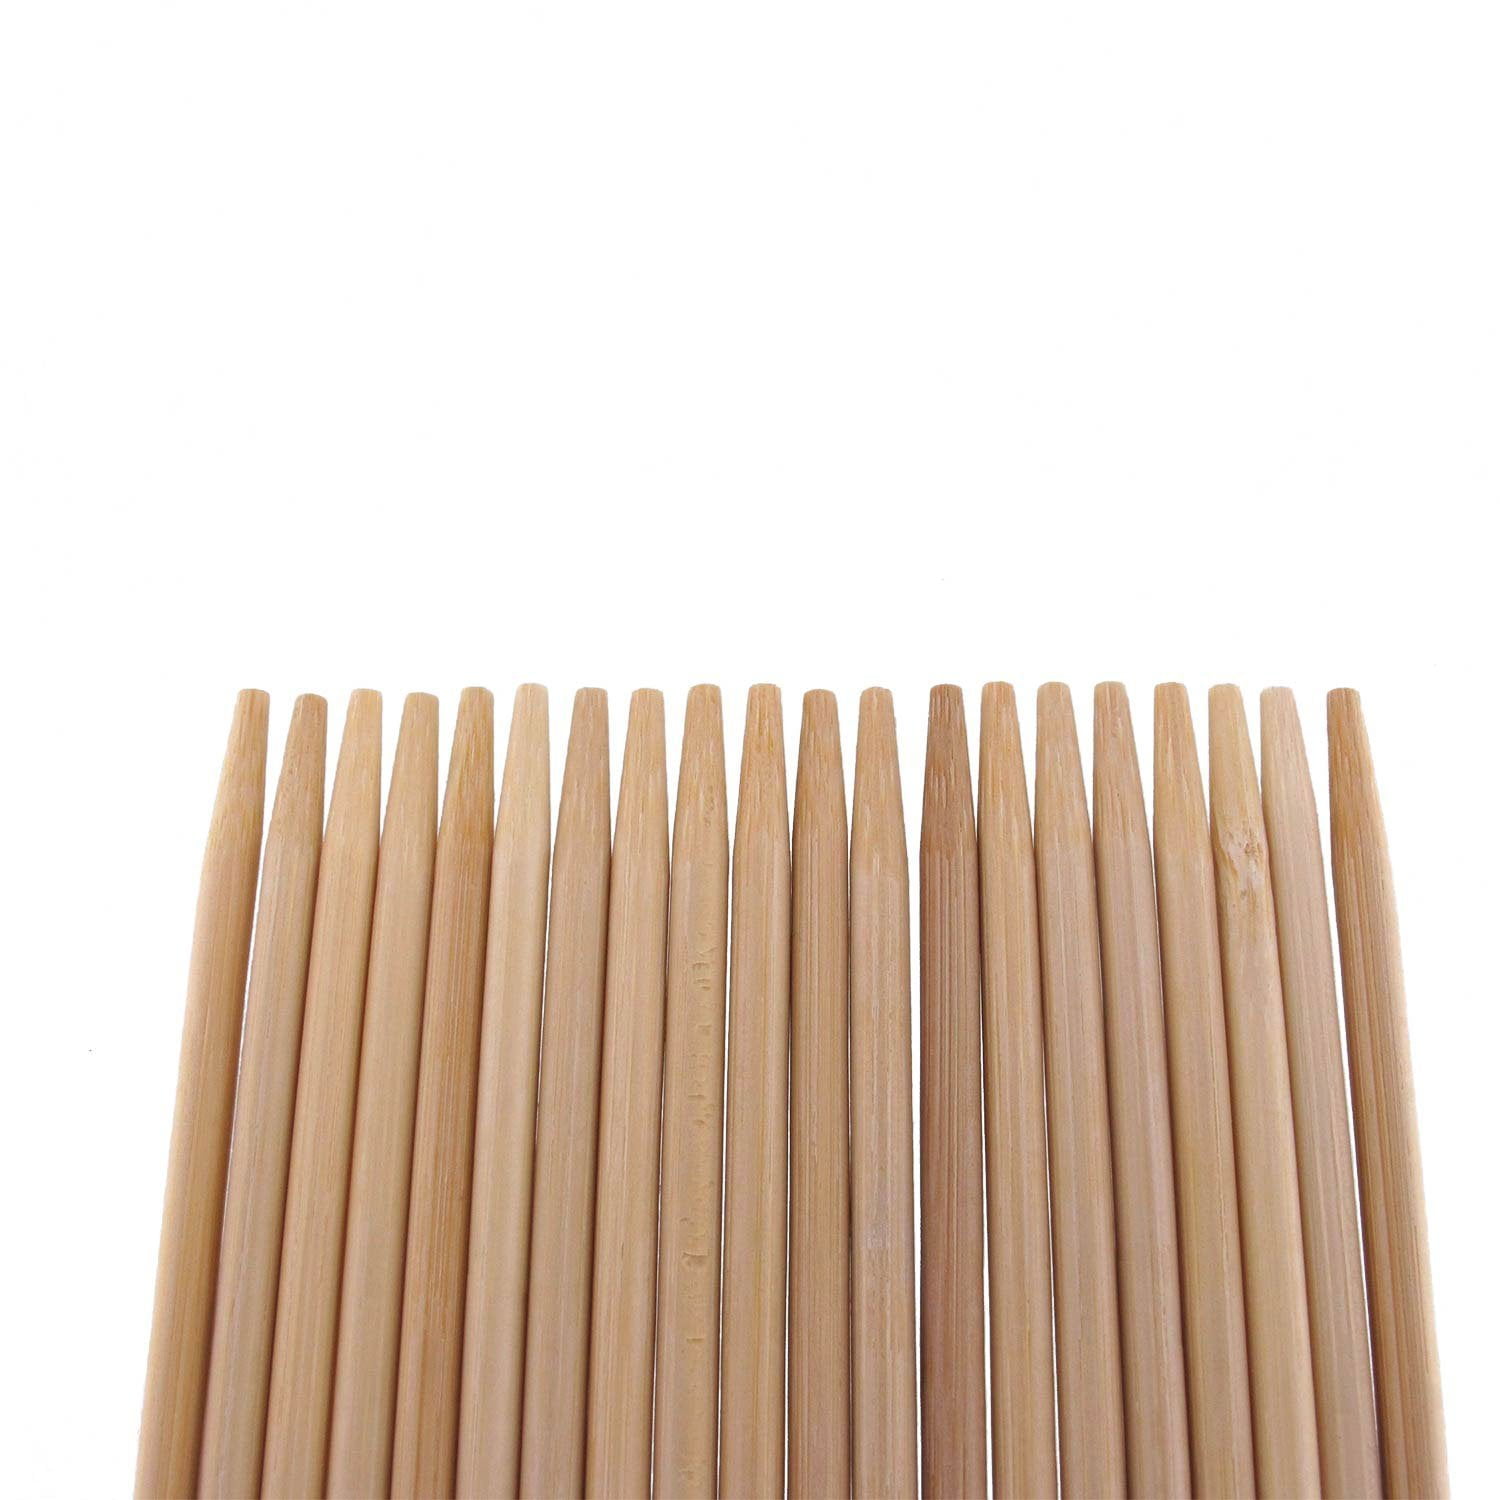 40 Bamboo Marshmallow S'mores Roasting Stick 36" 5mm Thick Extra Long Heavy Duty 